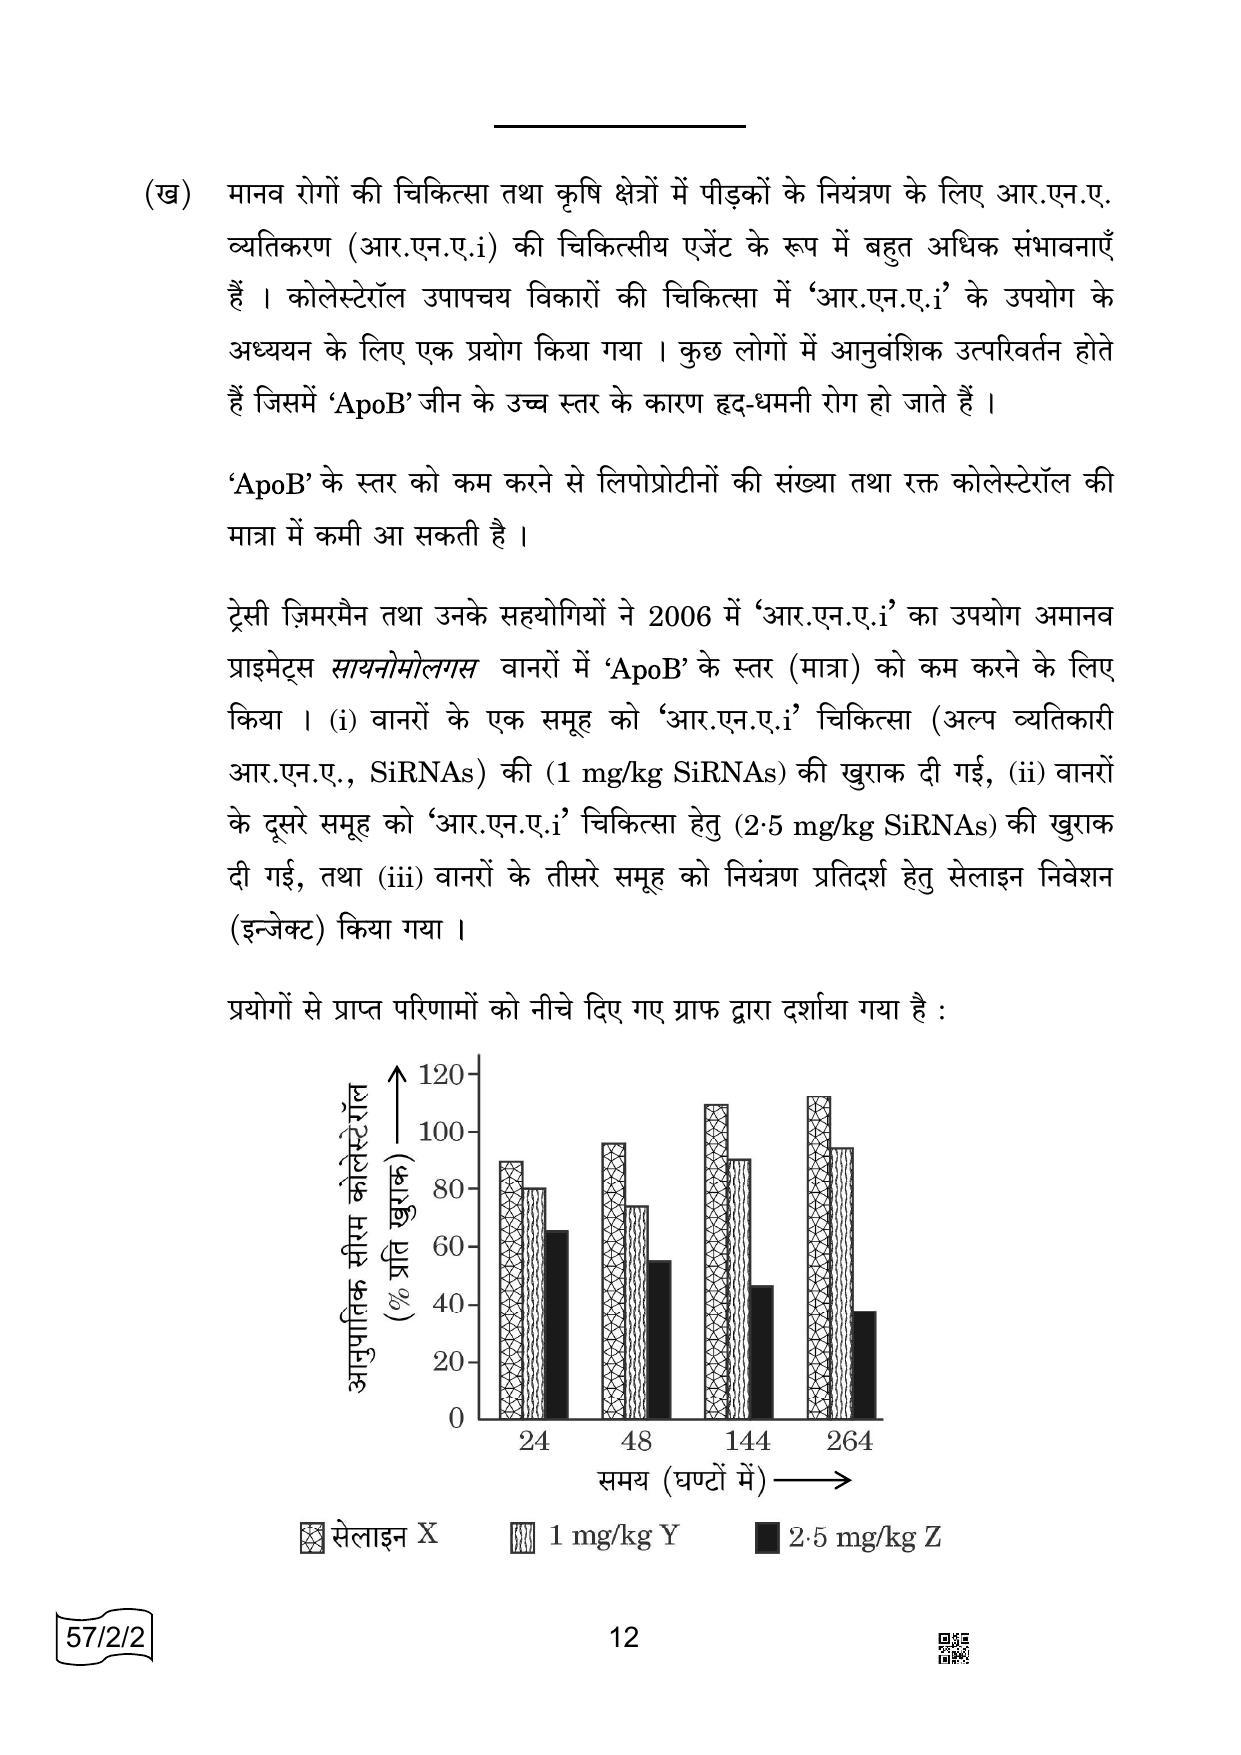 CBSE Class 12 57-2-2 Biology 2022 Question Paper - Page 12